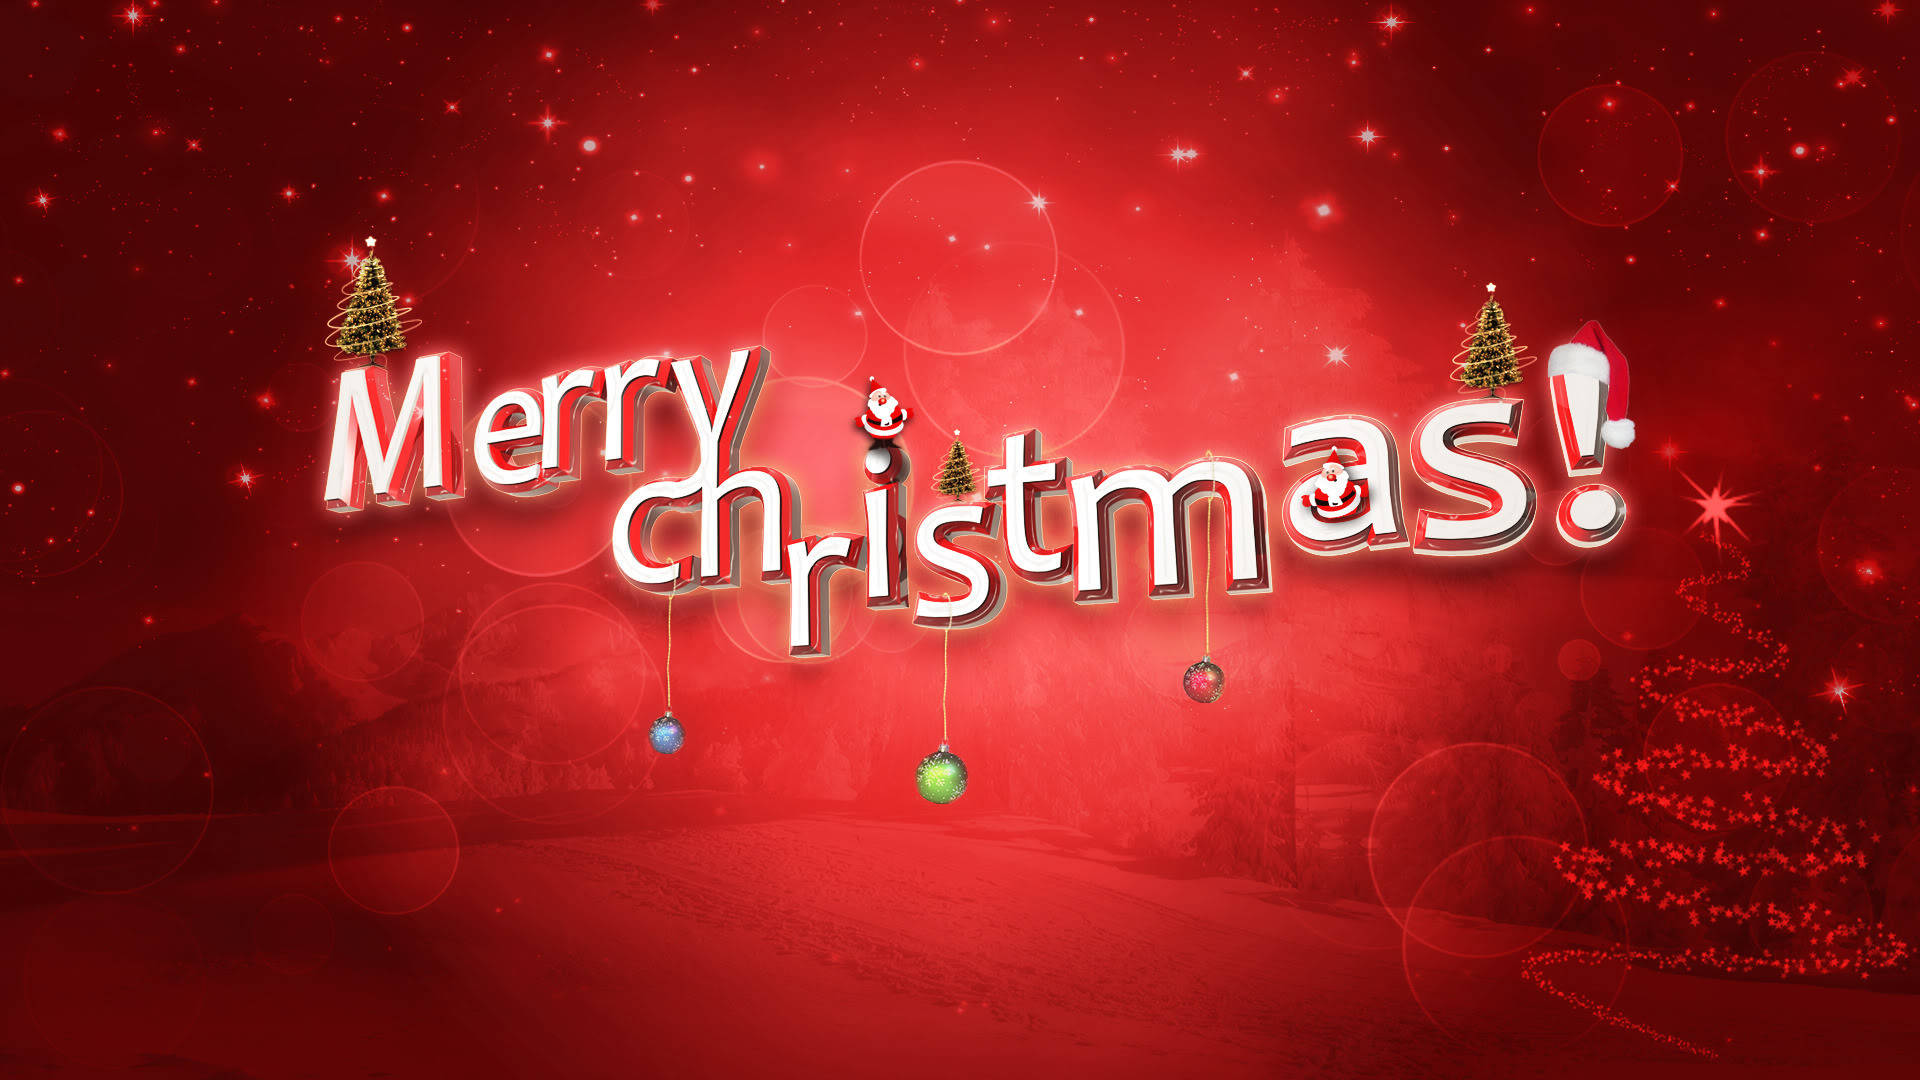 Merry Christmas Red Greetings Wallpaper